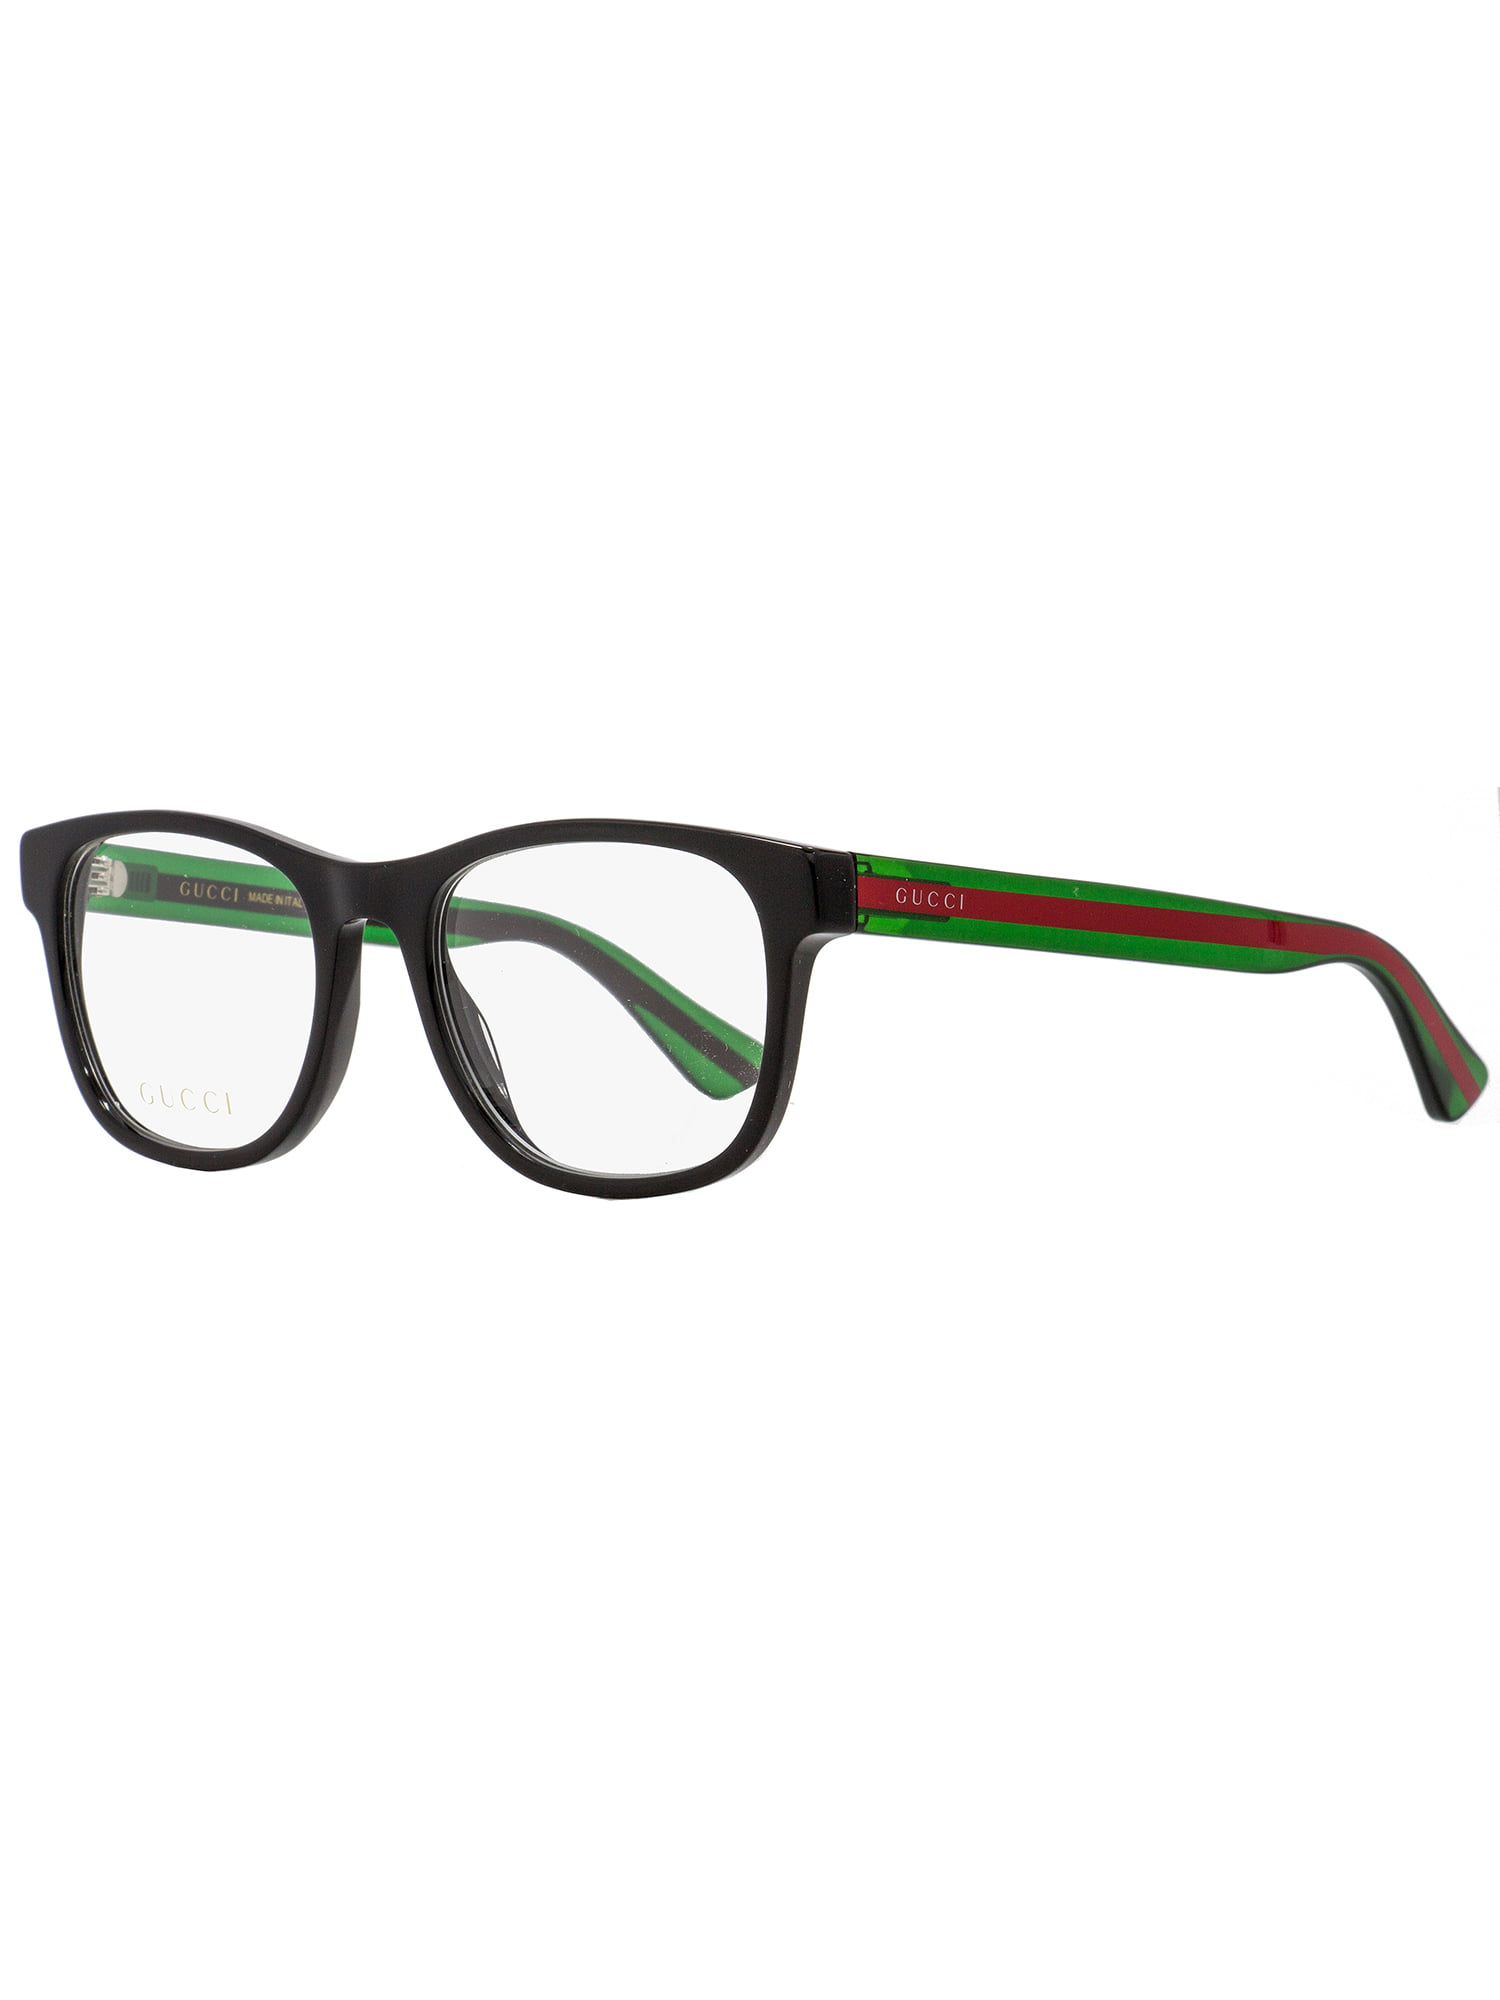 gucci glasses frames green and red